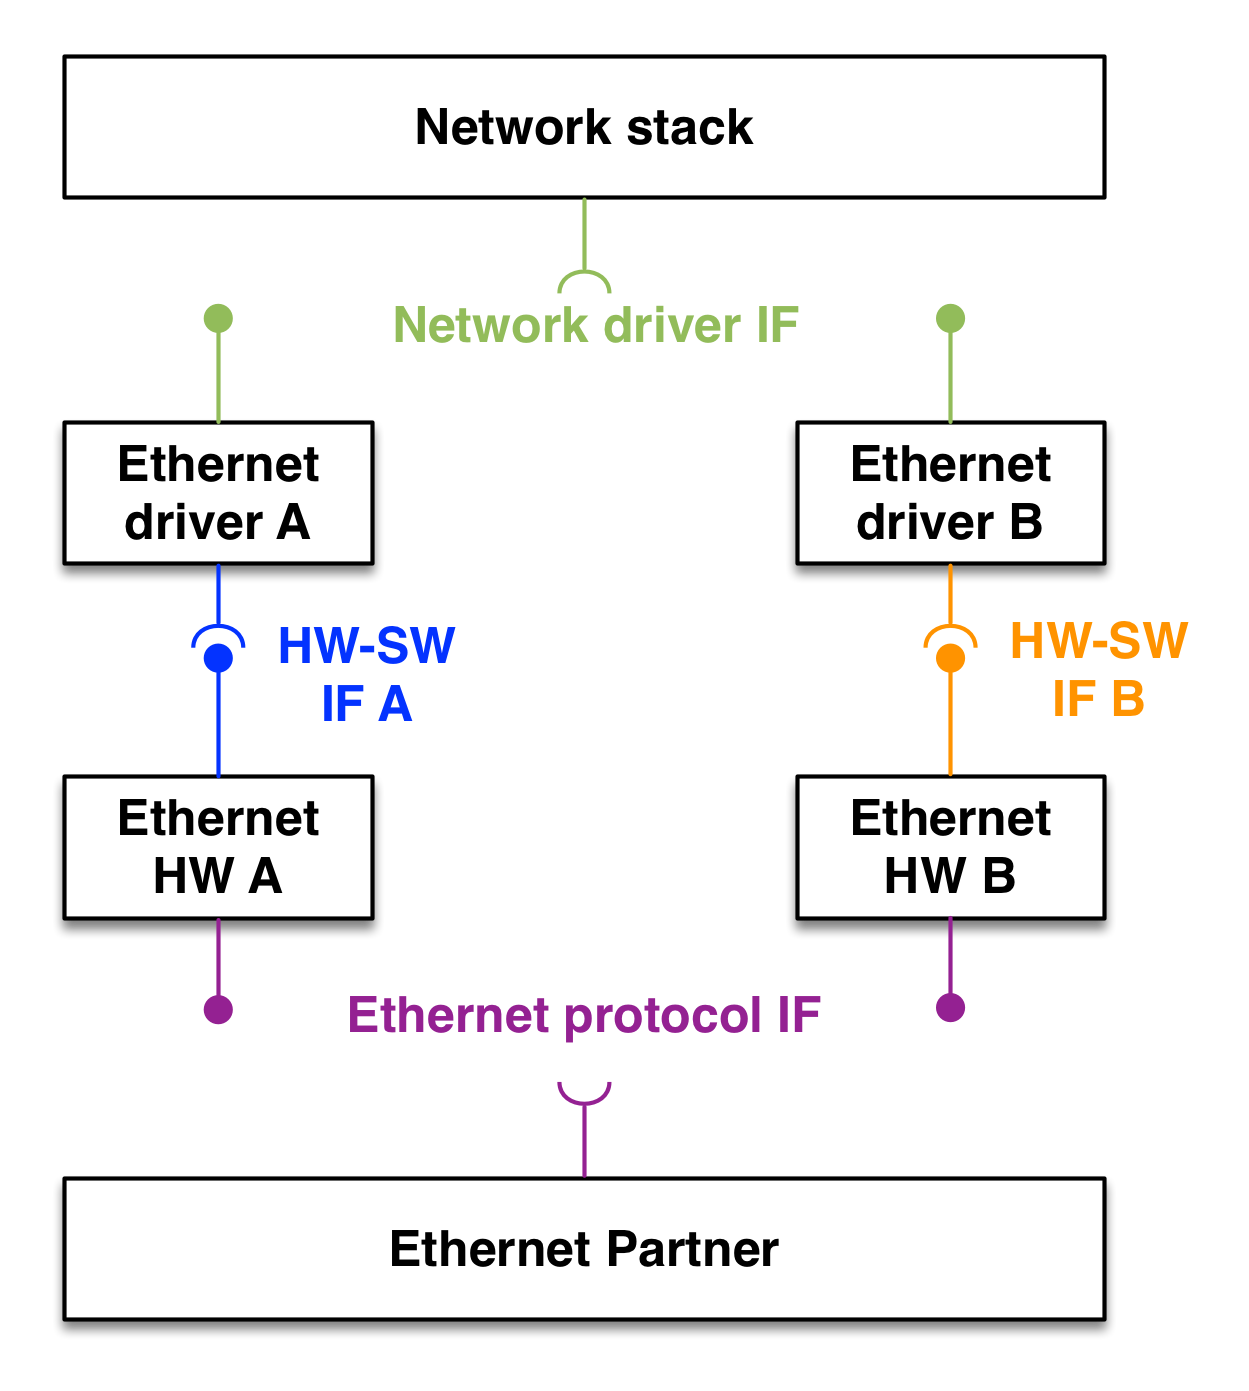 An example of Hardware Proxy Pattern for Ethernet drivers